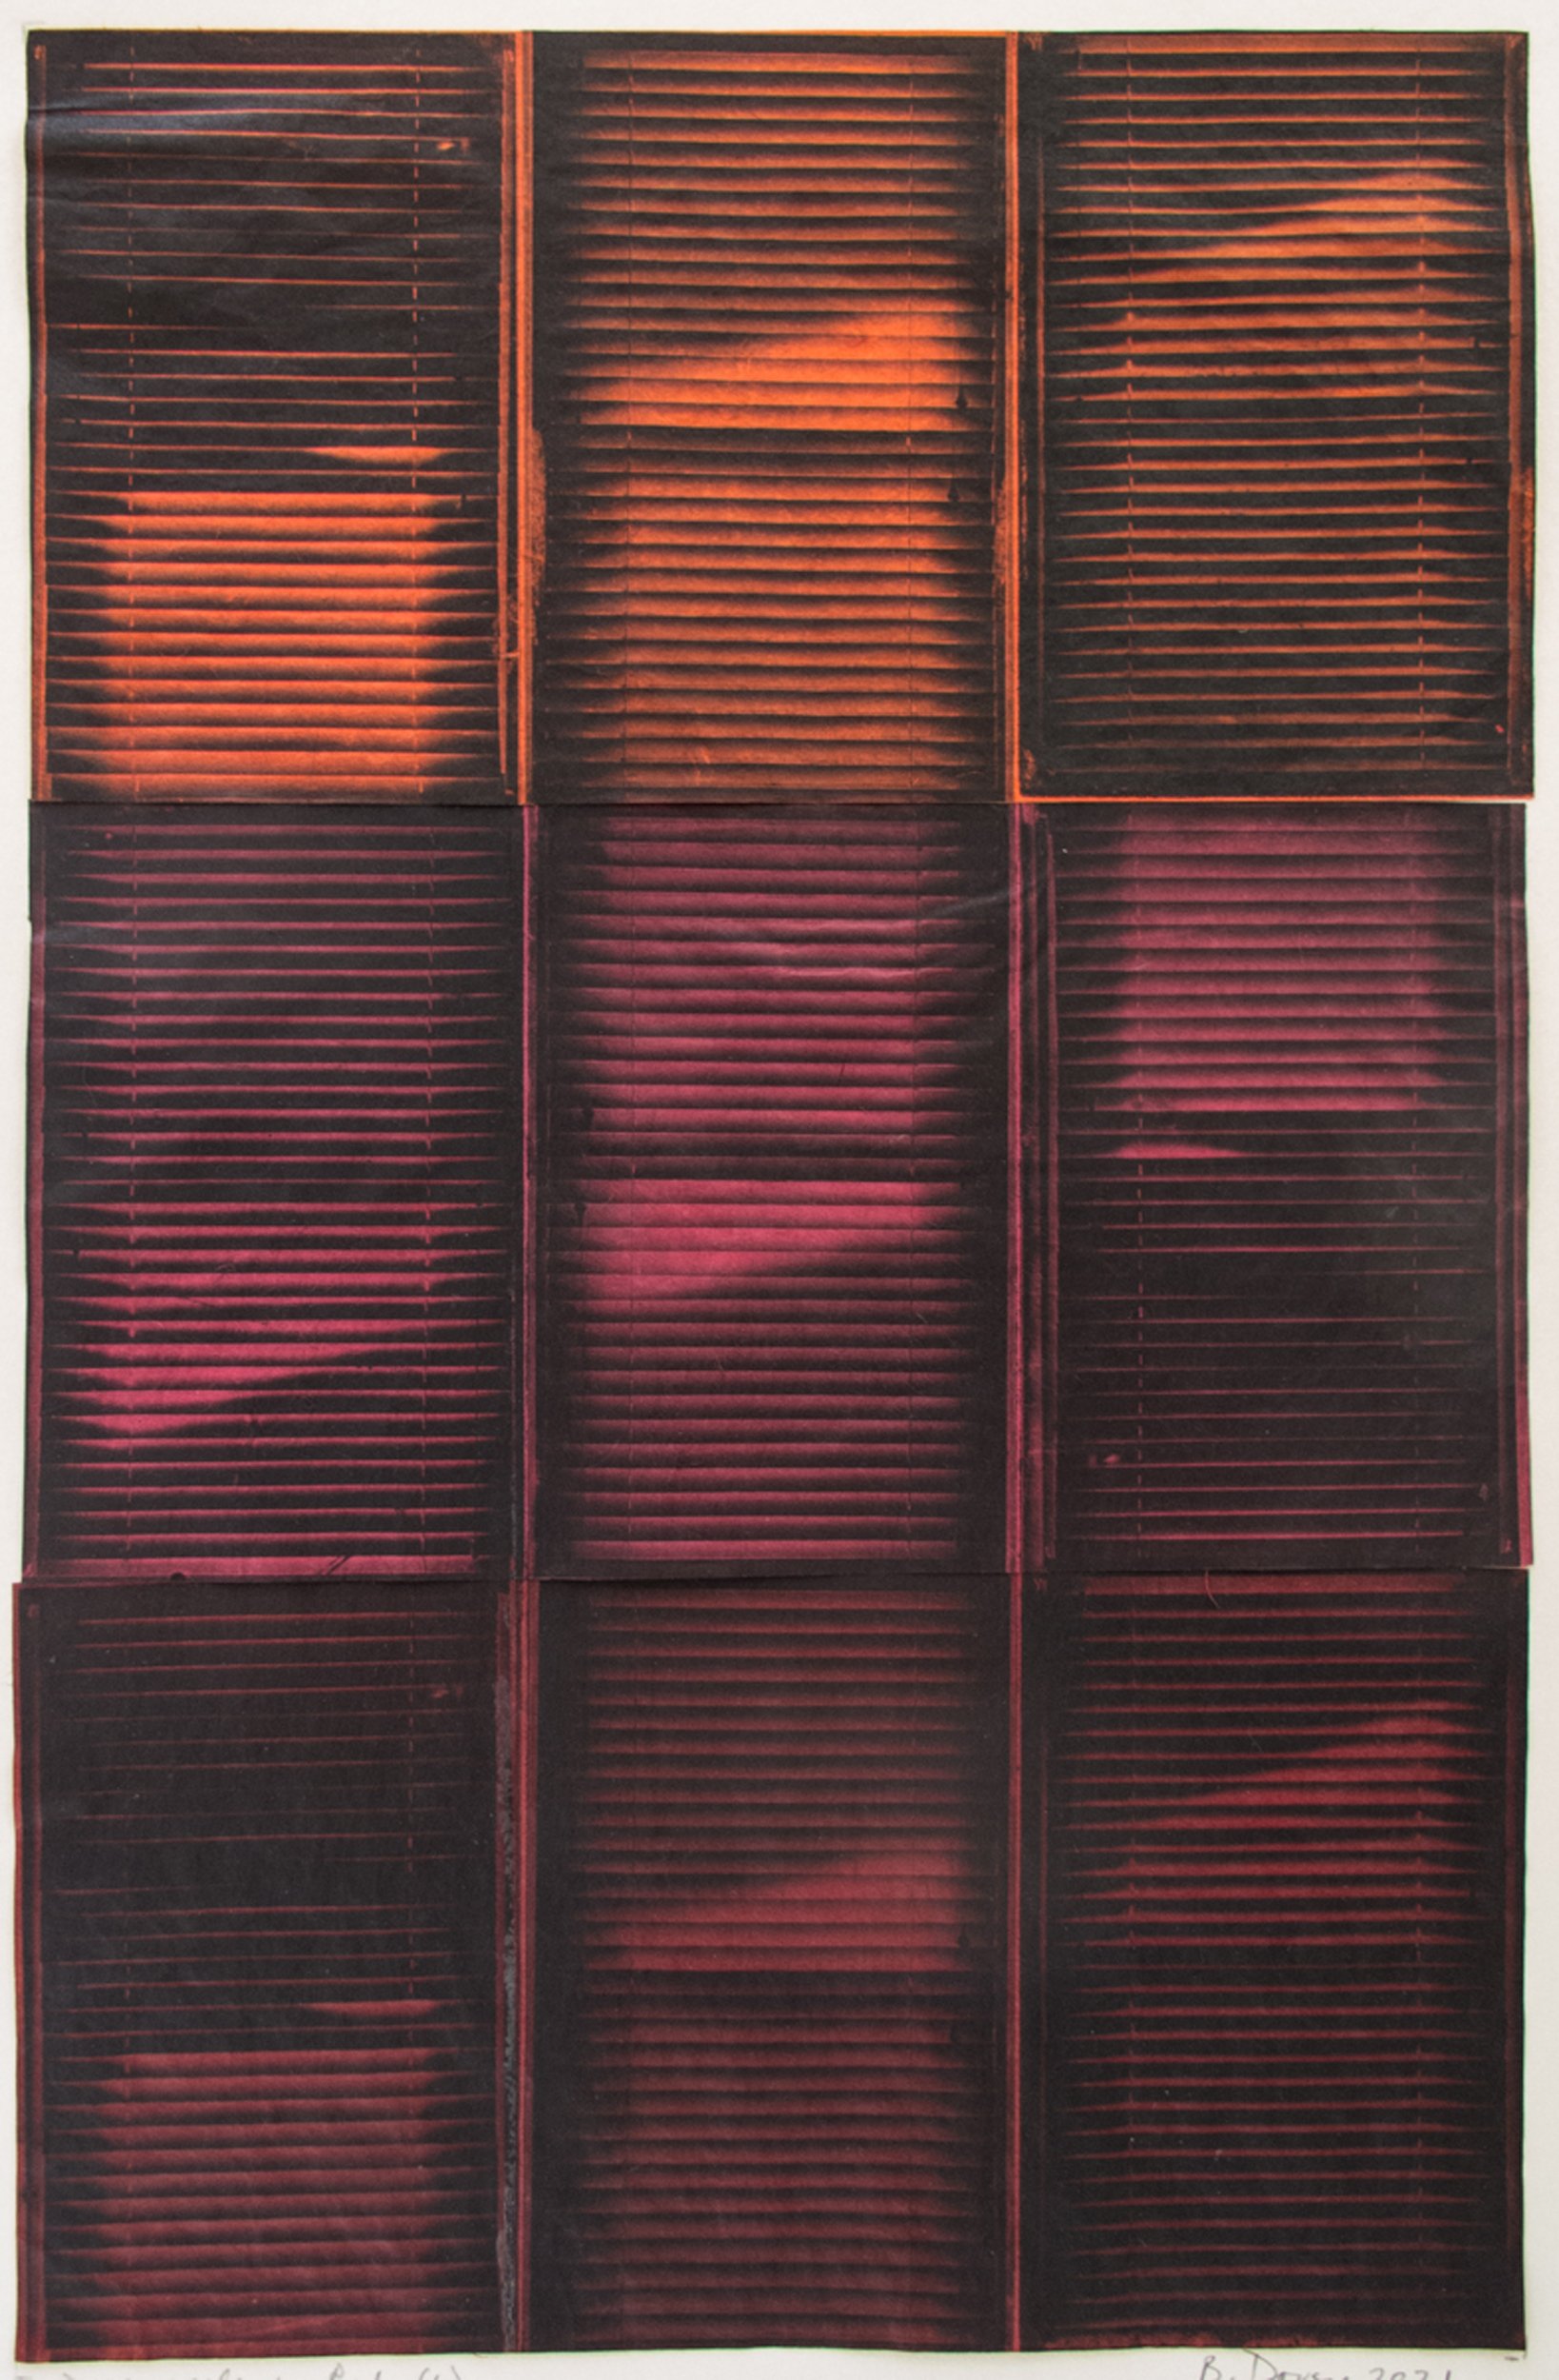  Beth Dorsey   Diagonals in red (1)   Polymer photogravure with chine collé 